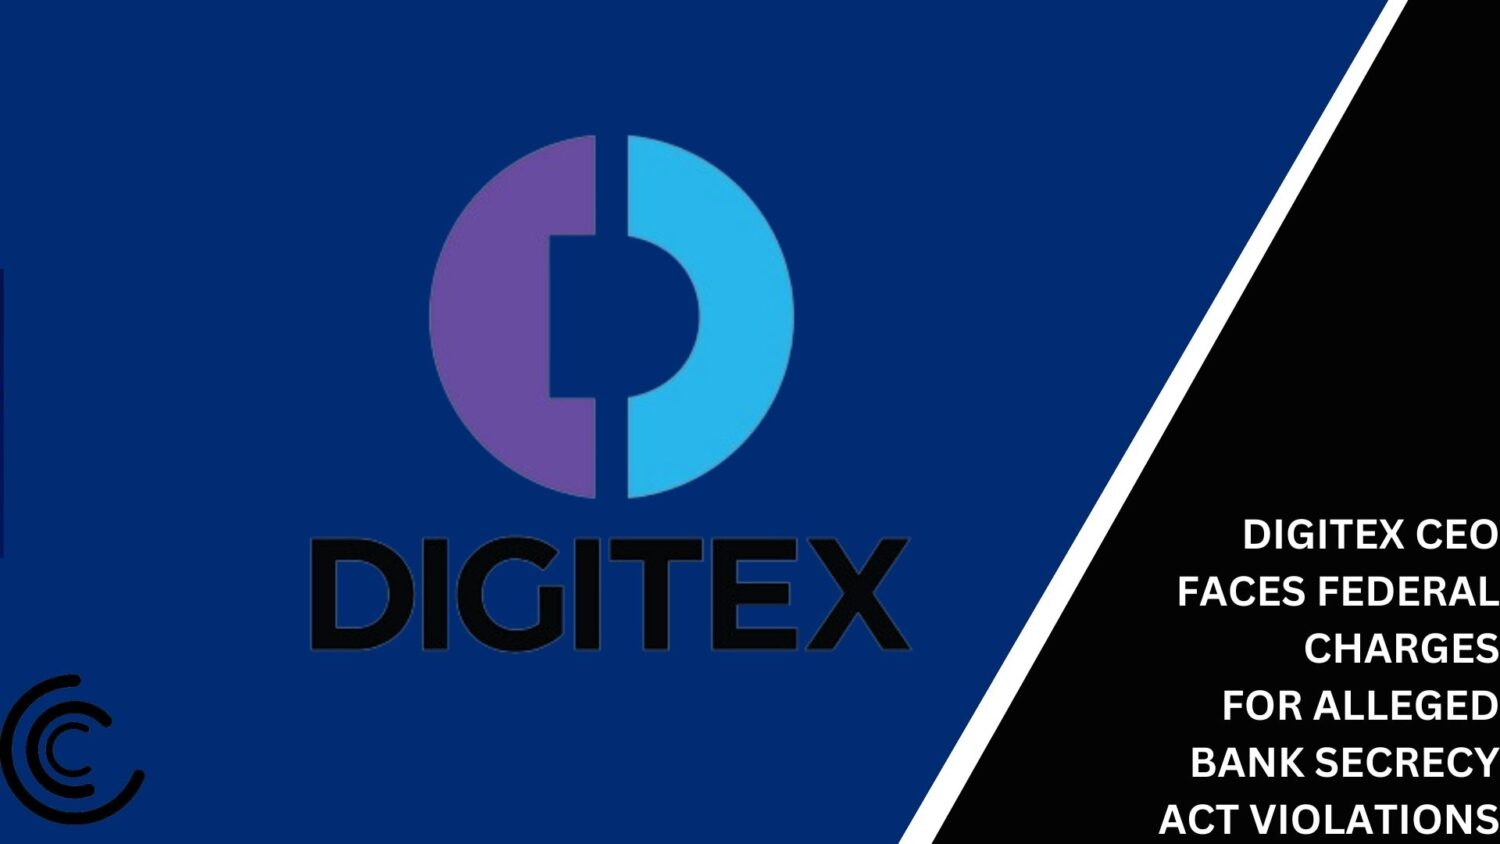 Digitex Ceo Faces Federal Charges For Alleged Bank Secrecy Act Violations